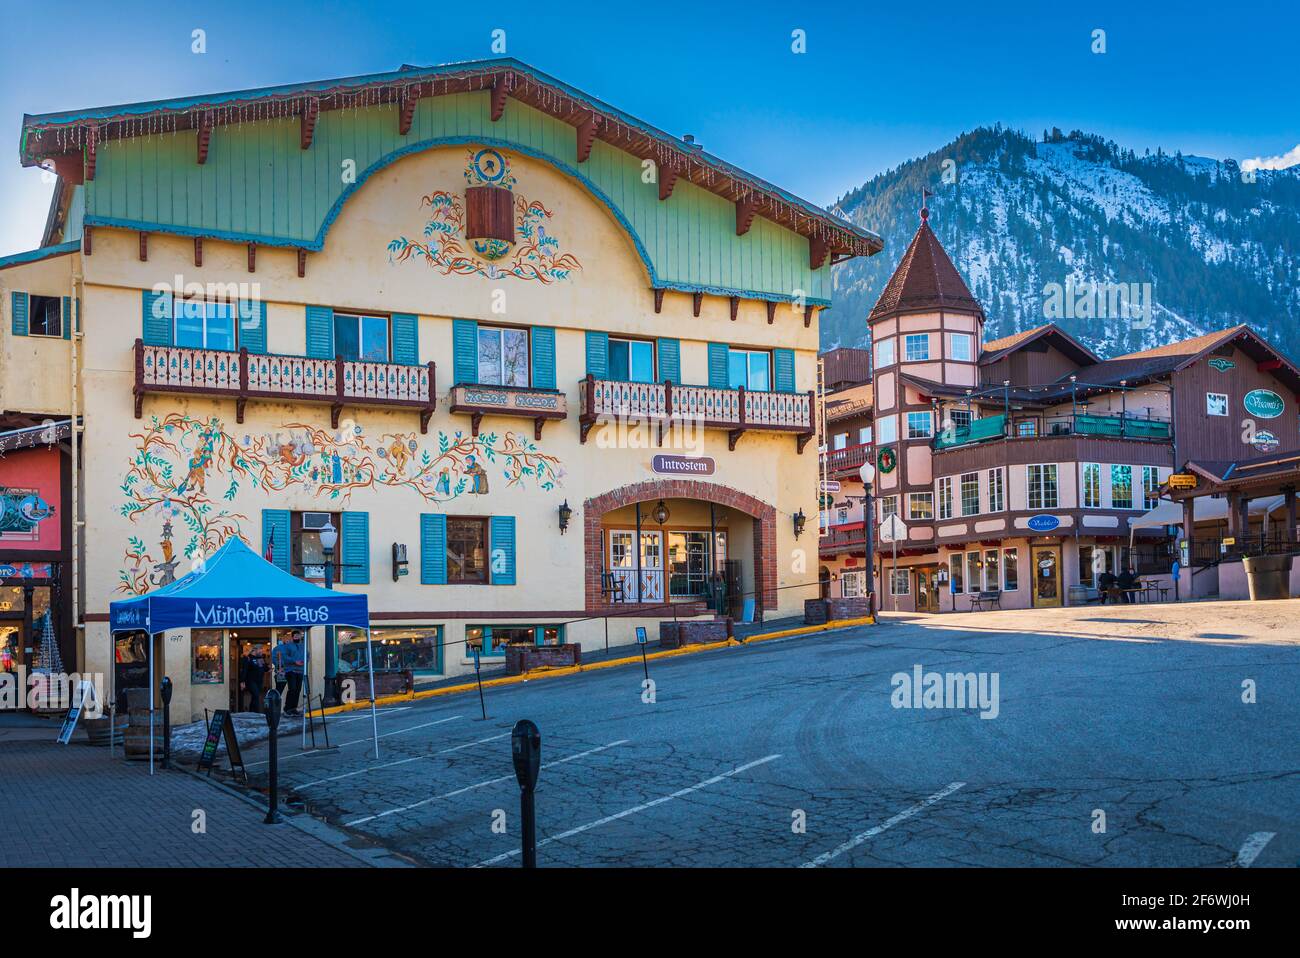 Leavenworth is a city in Chelan County, Washington, in Eastern Washington United States. The entire town center is modelled on a Bavarian village. Stock Photo